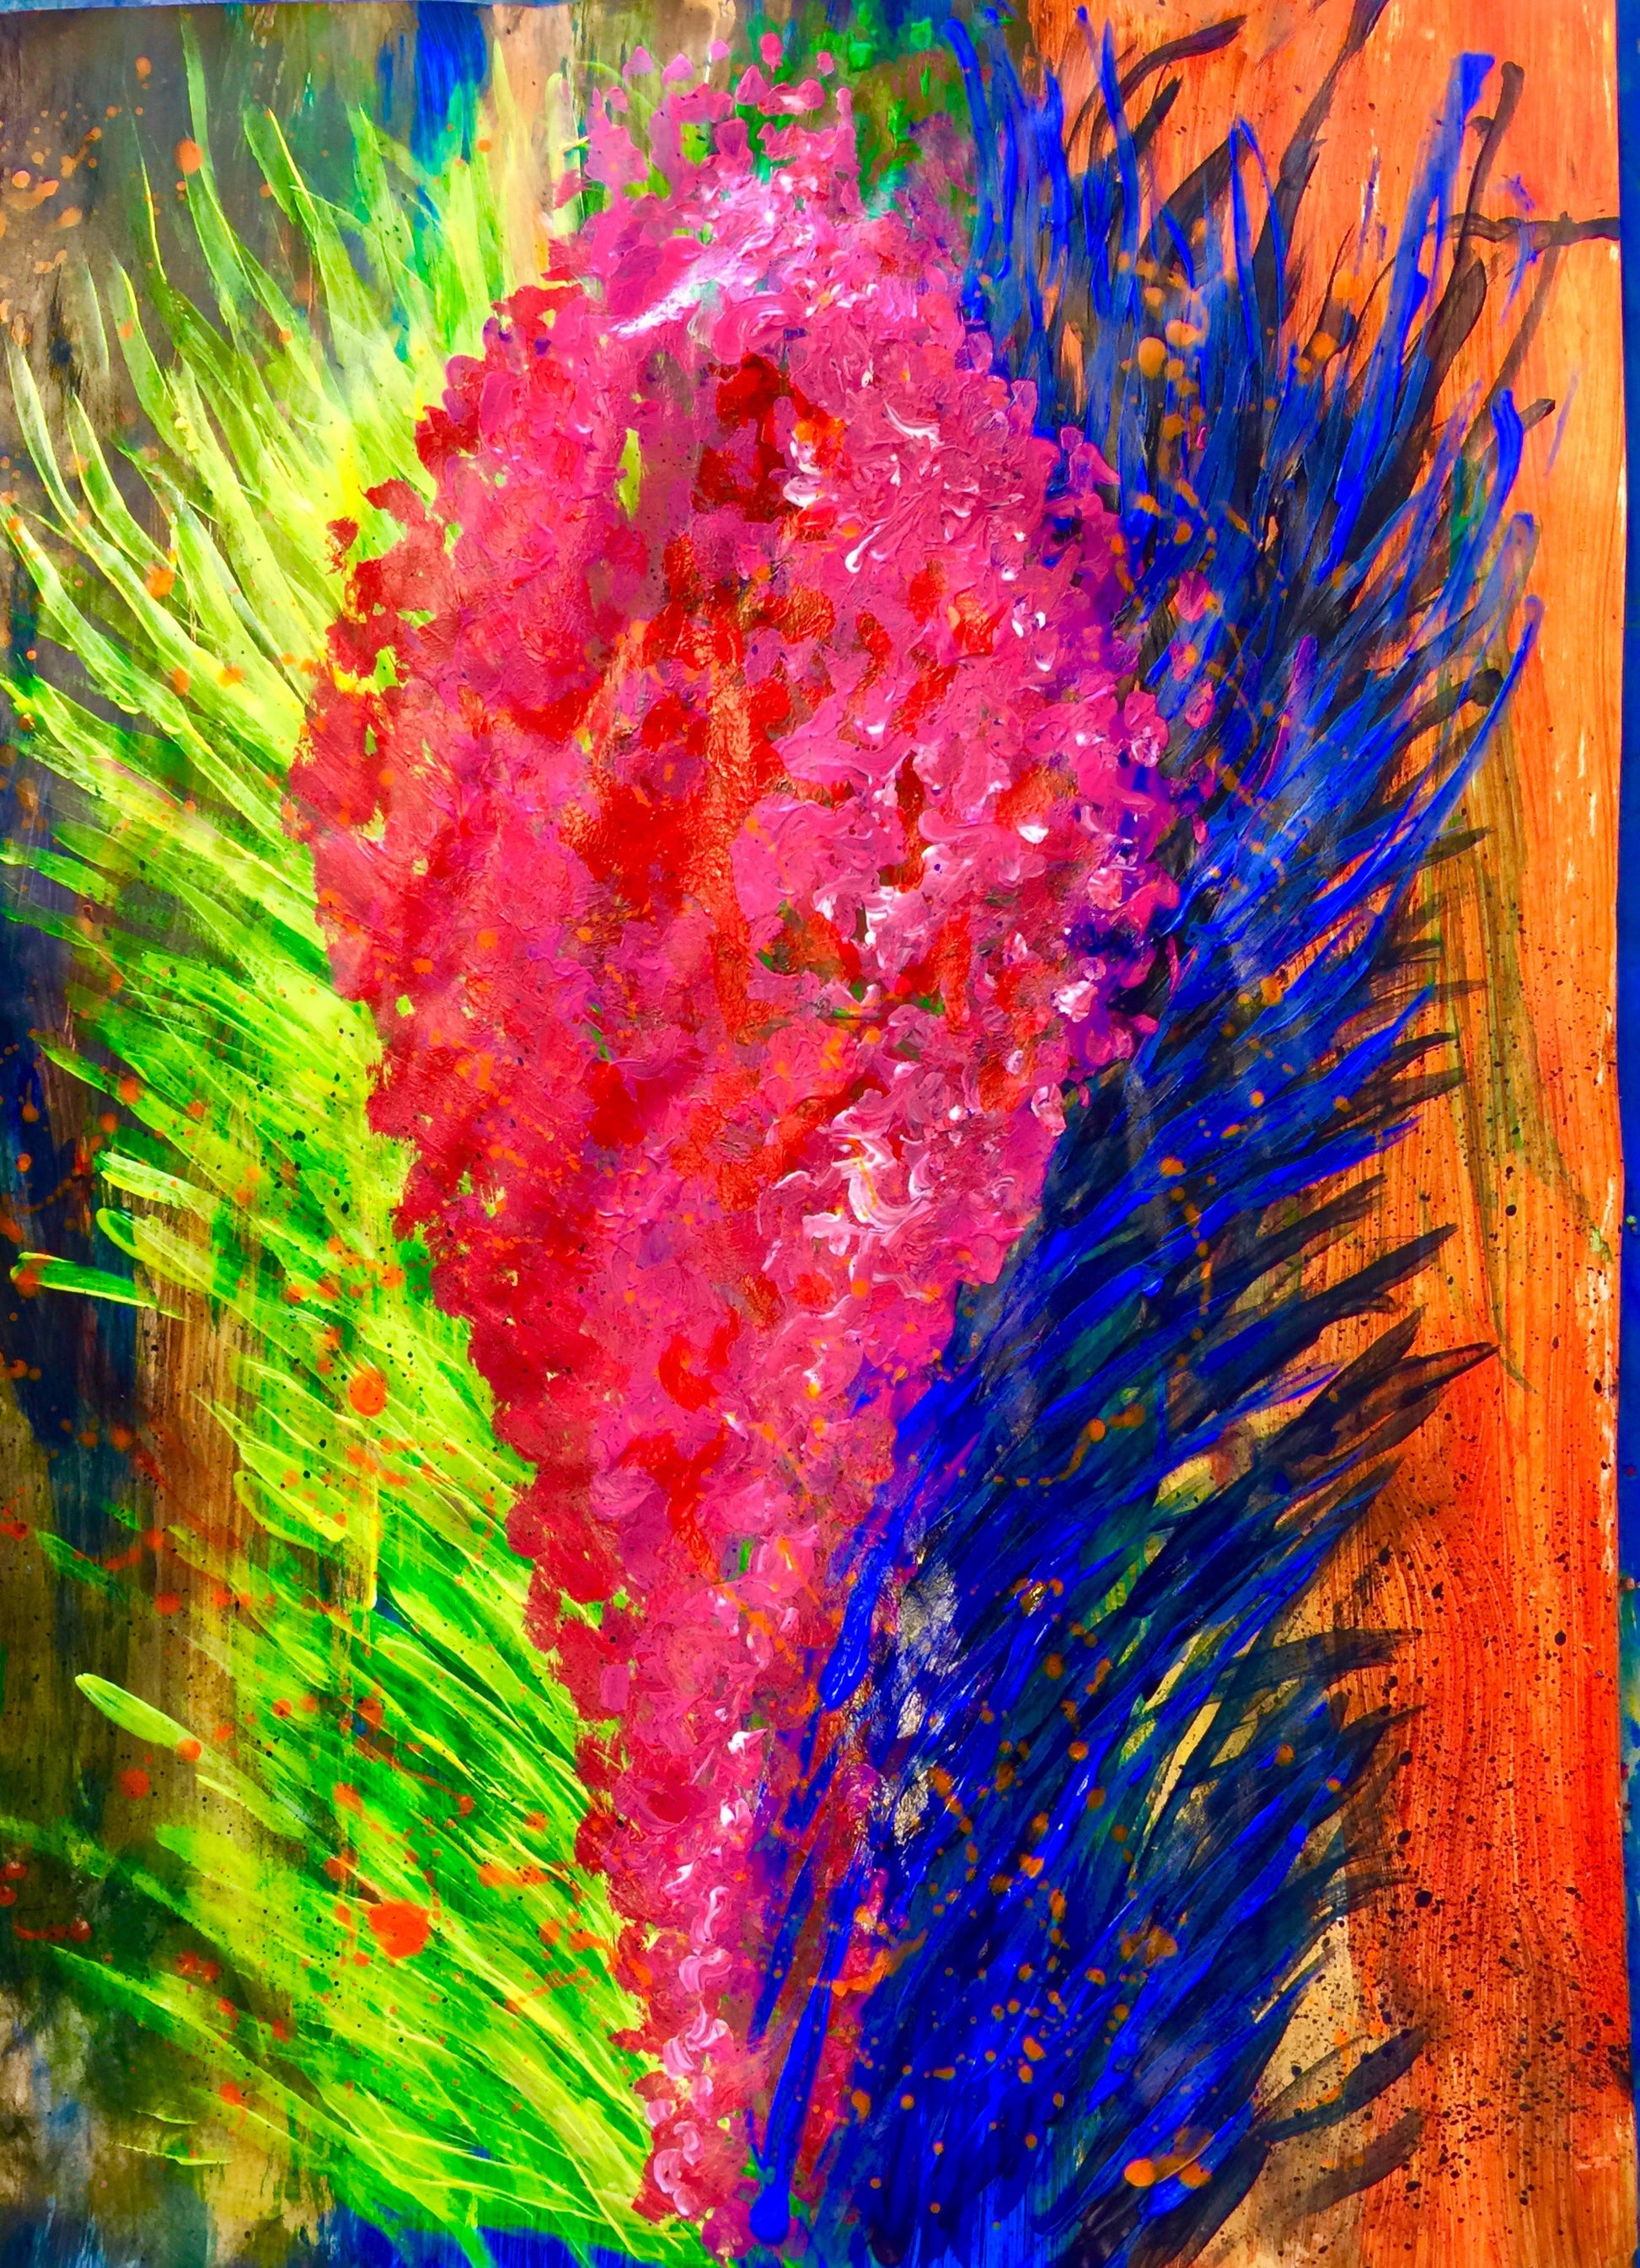 Venus - Sonarta.com Amazing and colorful, Yes, it is the image of Venus and what a beauty it is.  This is an Acrylic on Paper painting by Shahla Rahimi Reynolds.  Venus is 19” W x 24” H.